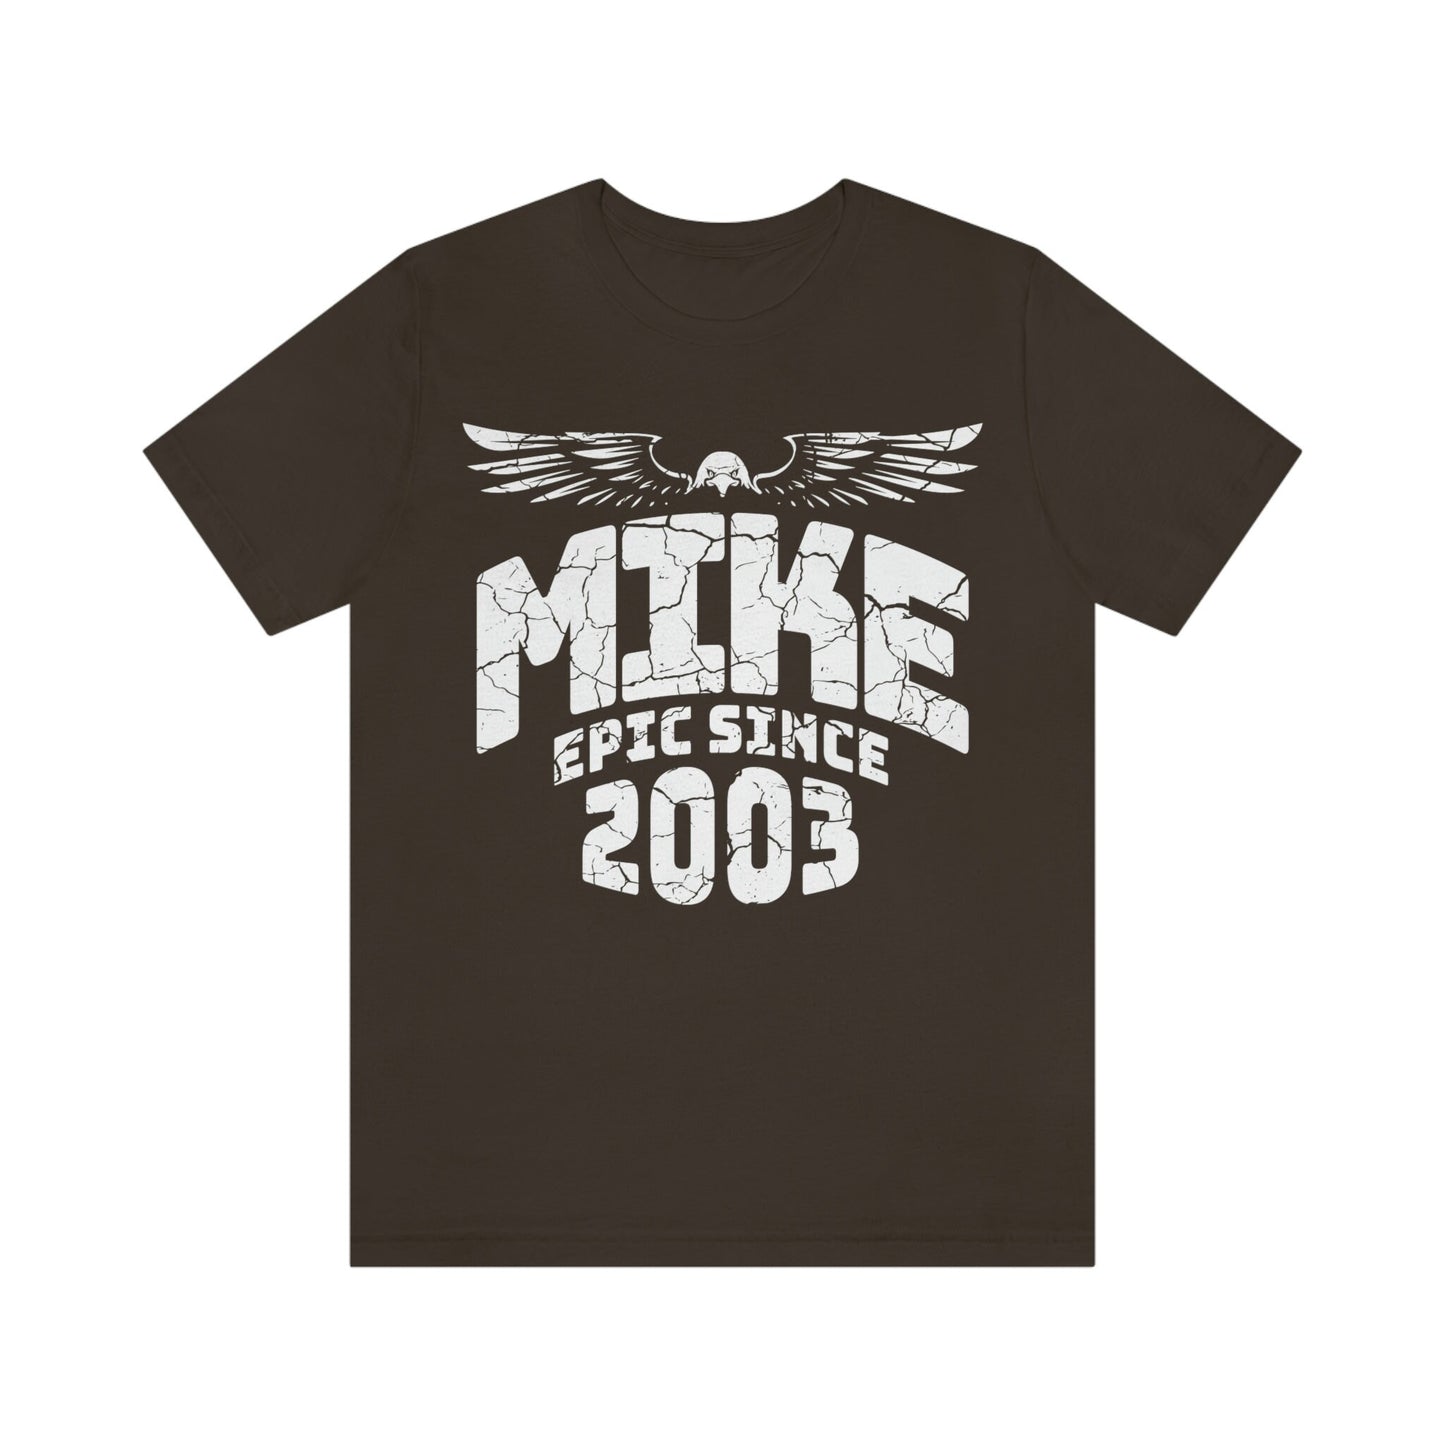 Birthday Gift T-Shirt for Son or Nephew, Epic Since 2003 Personalized Name t-shirt